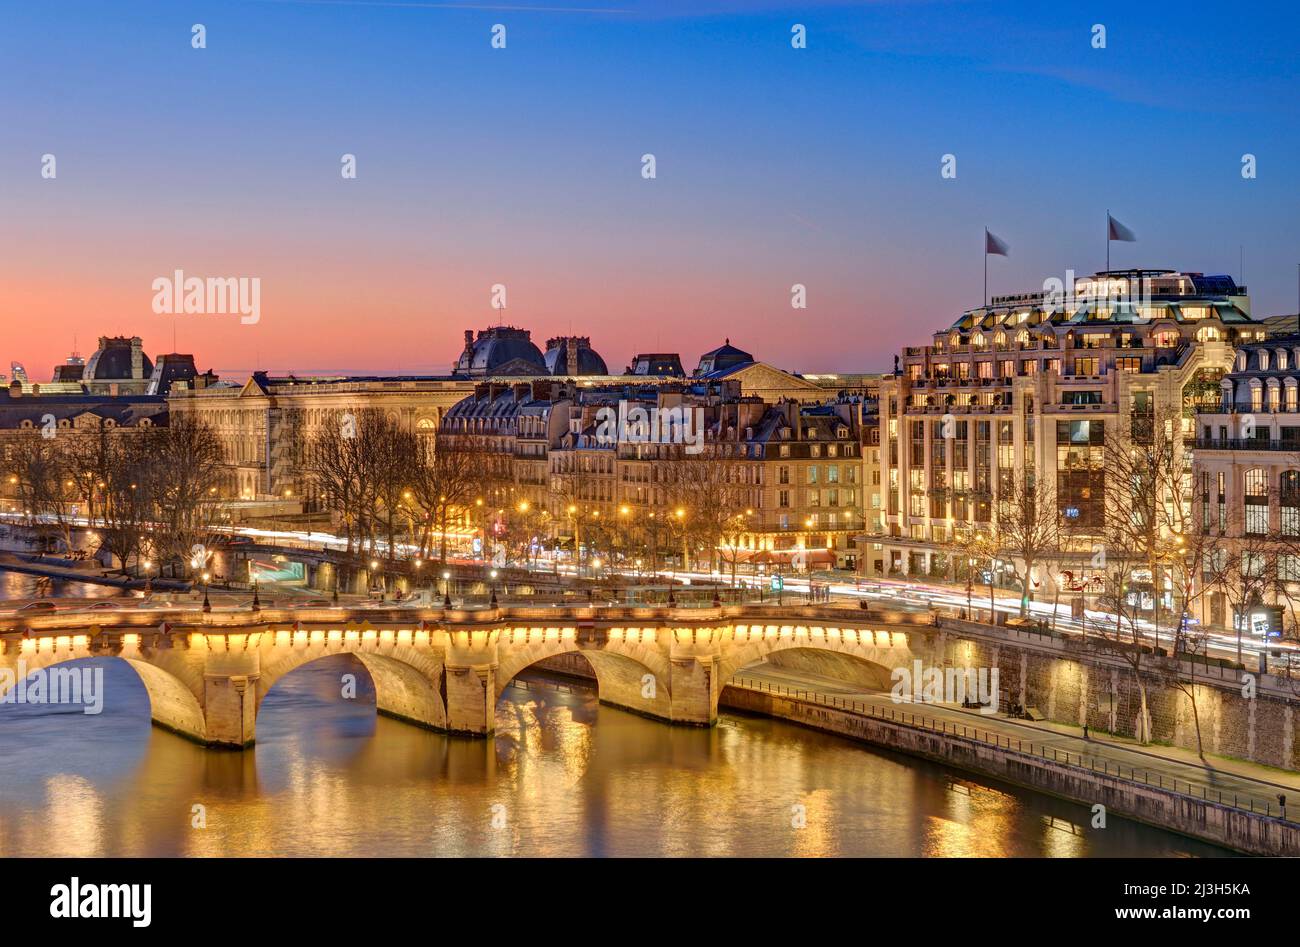 France, Paris, the banks of the Seine river listed as World Heritage by UNESCO, La Samaritaine department store and the Pont-Neuf (New Bridge) Stock Photo